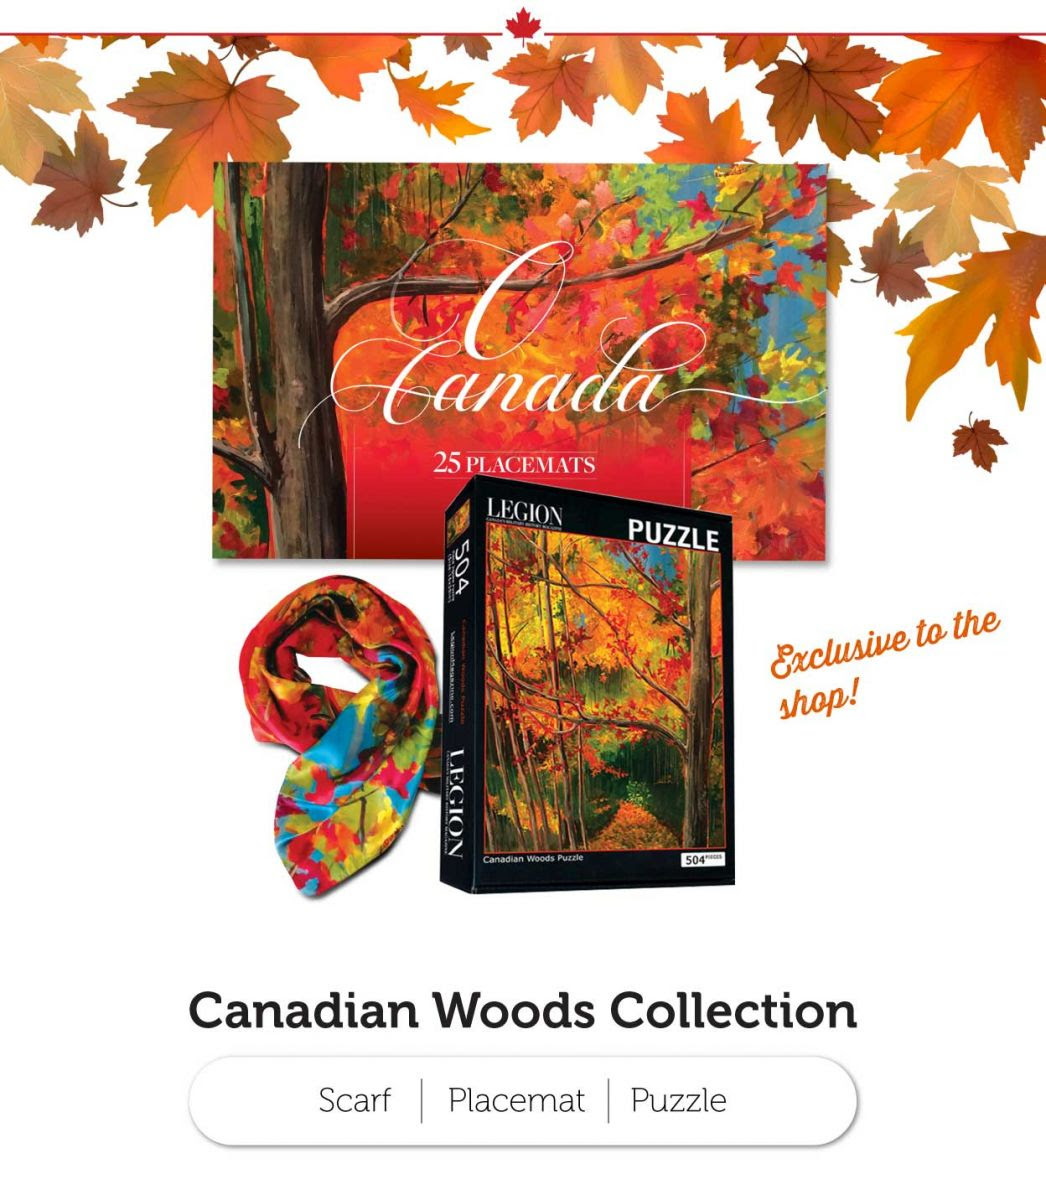 Canadian Woods Collection